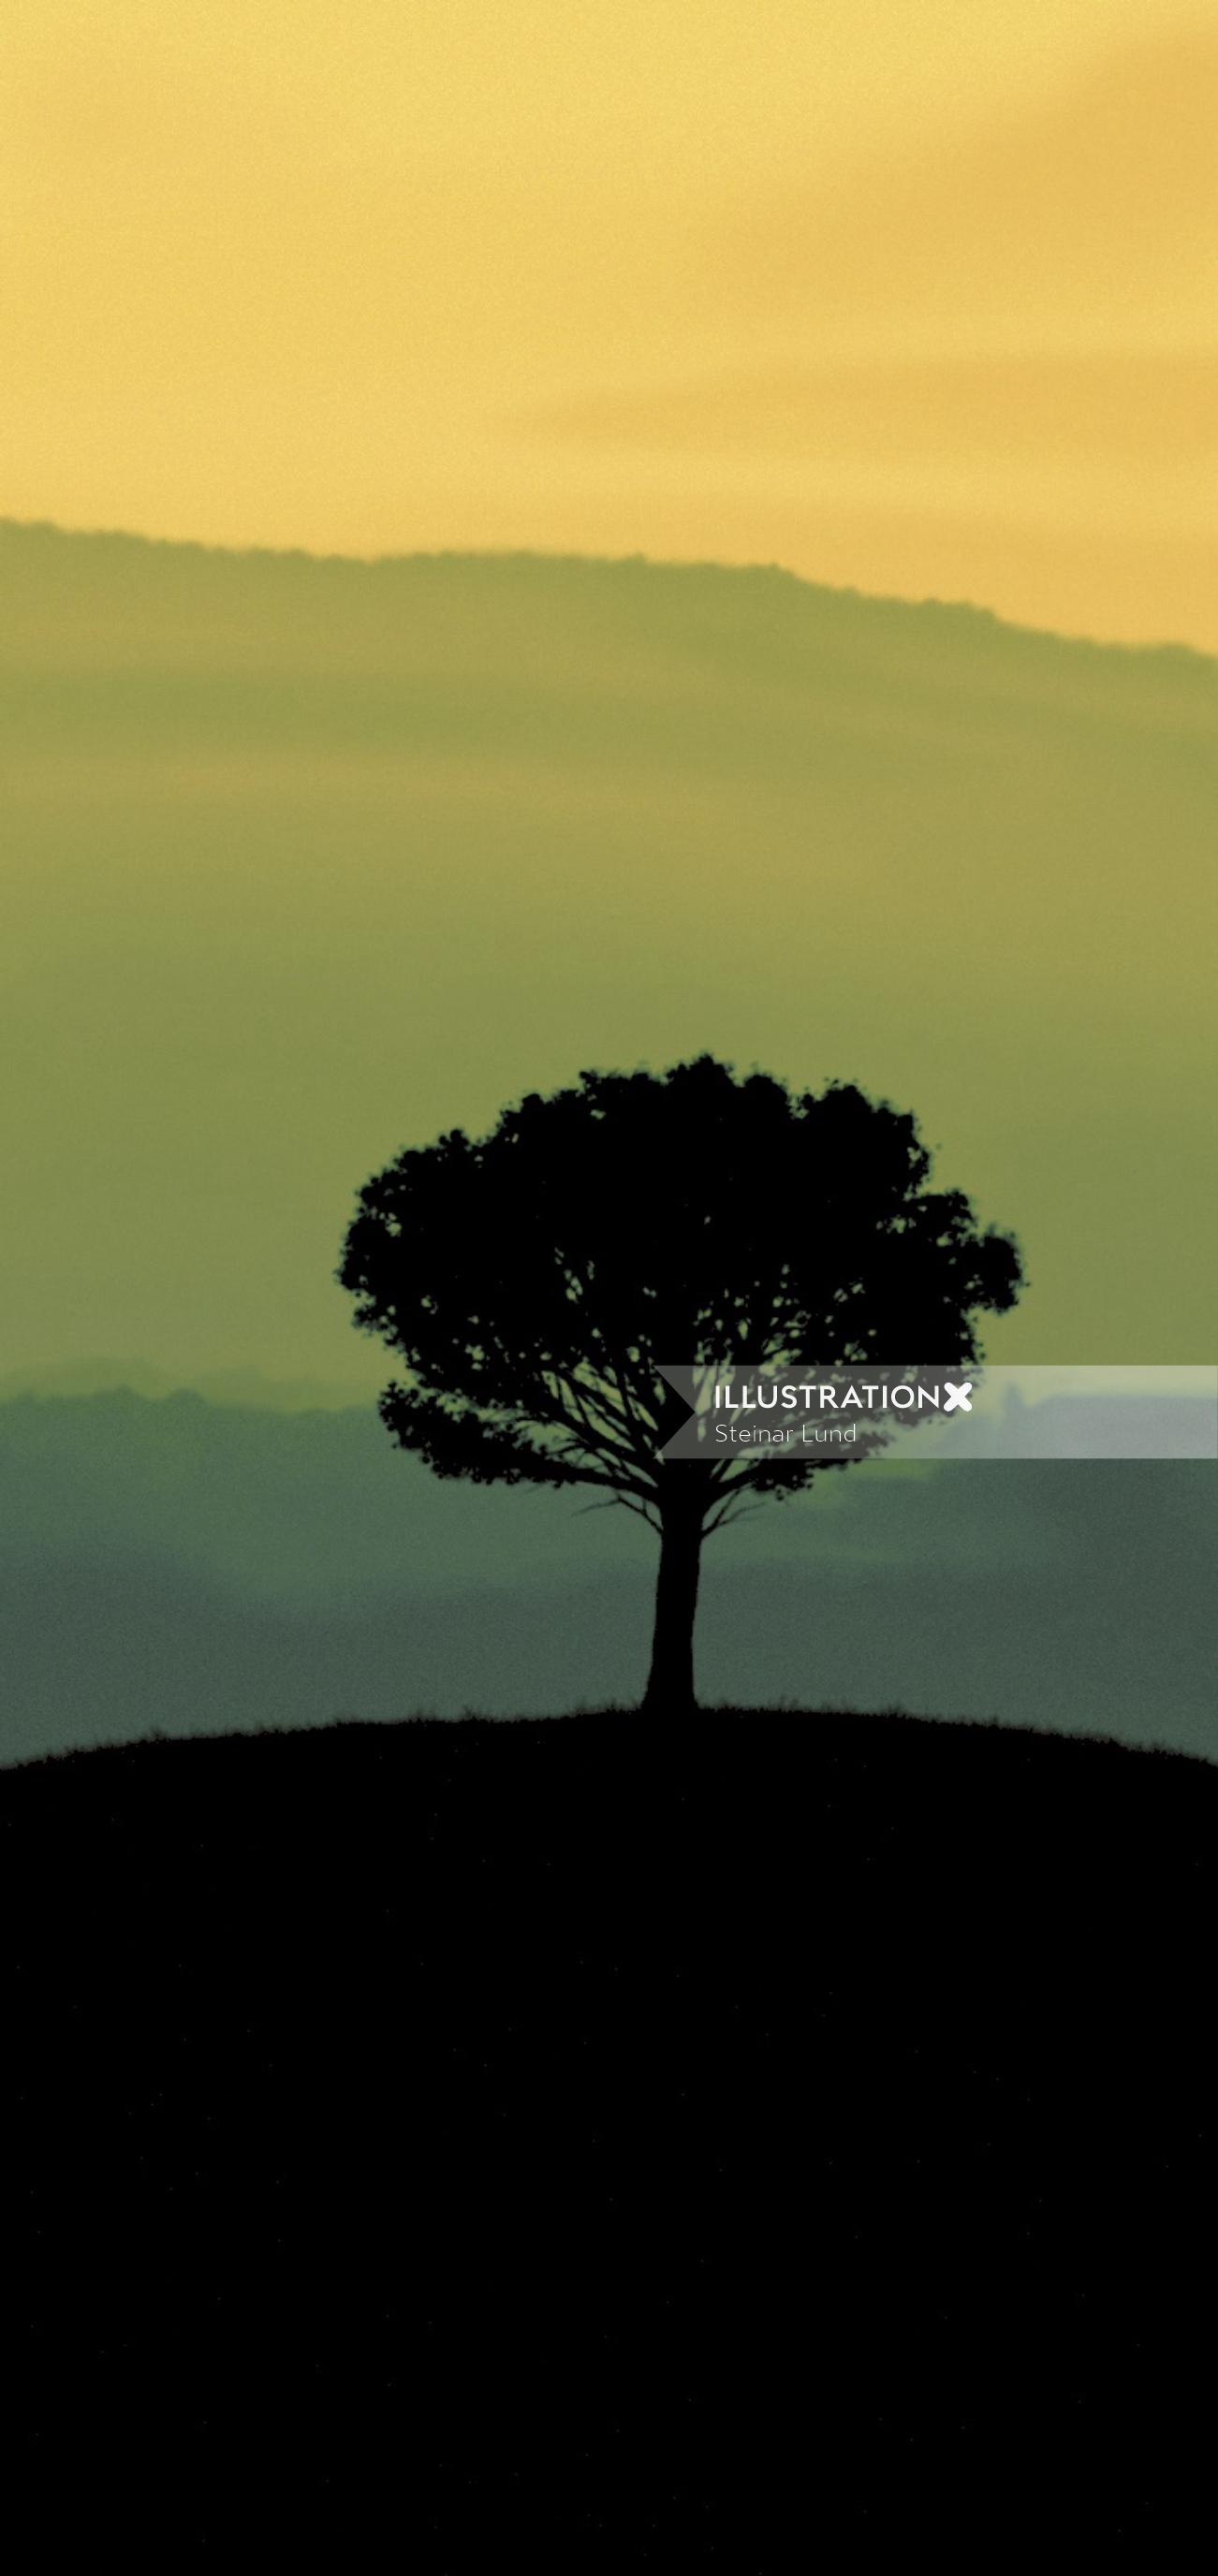 Silhouette of tree in green landscape for Sainsburys